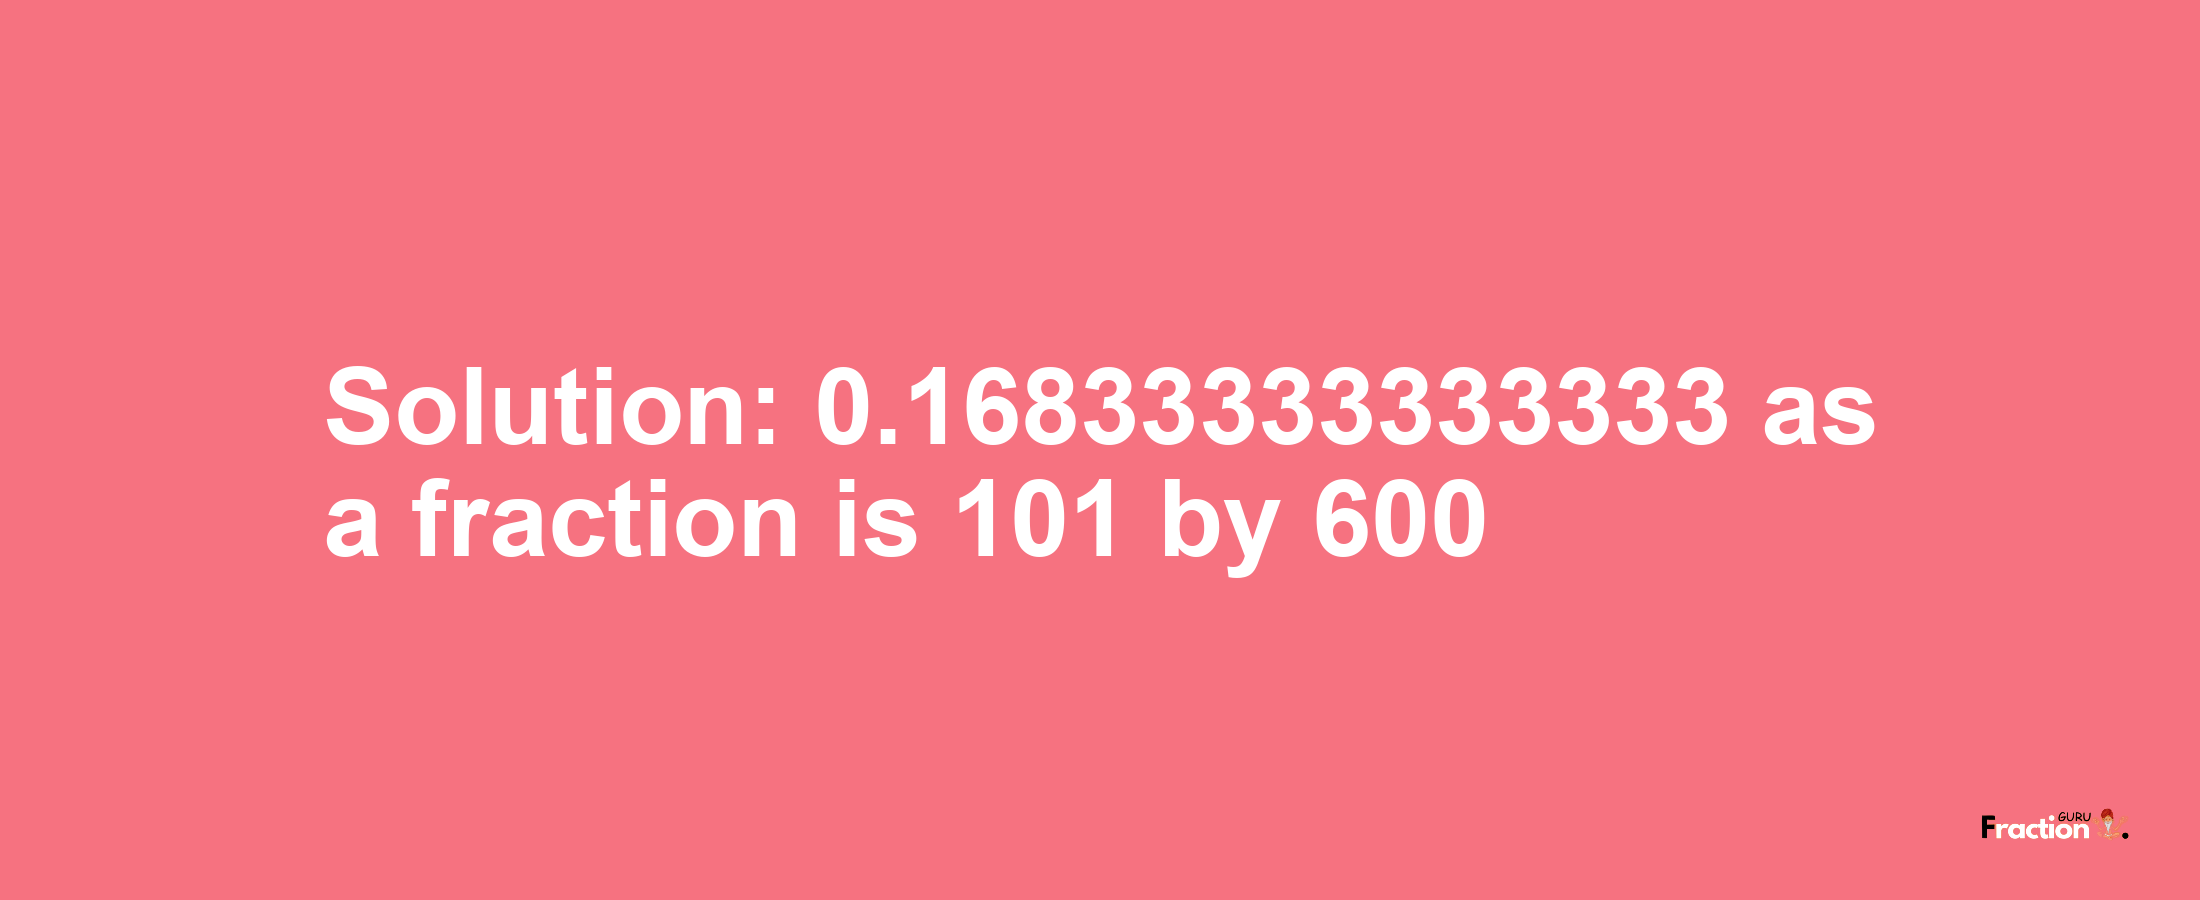 Solution:0.16833333333333 as a fraction is 101/600